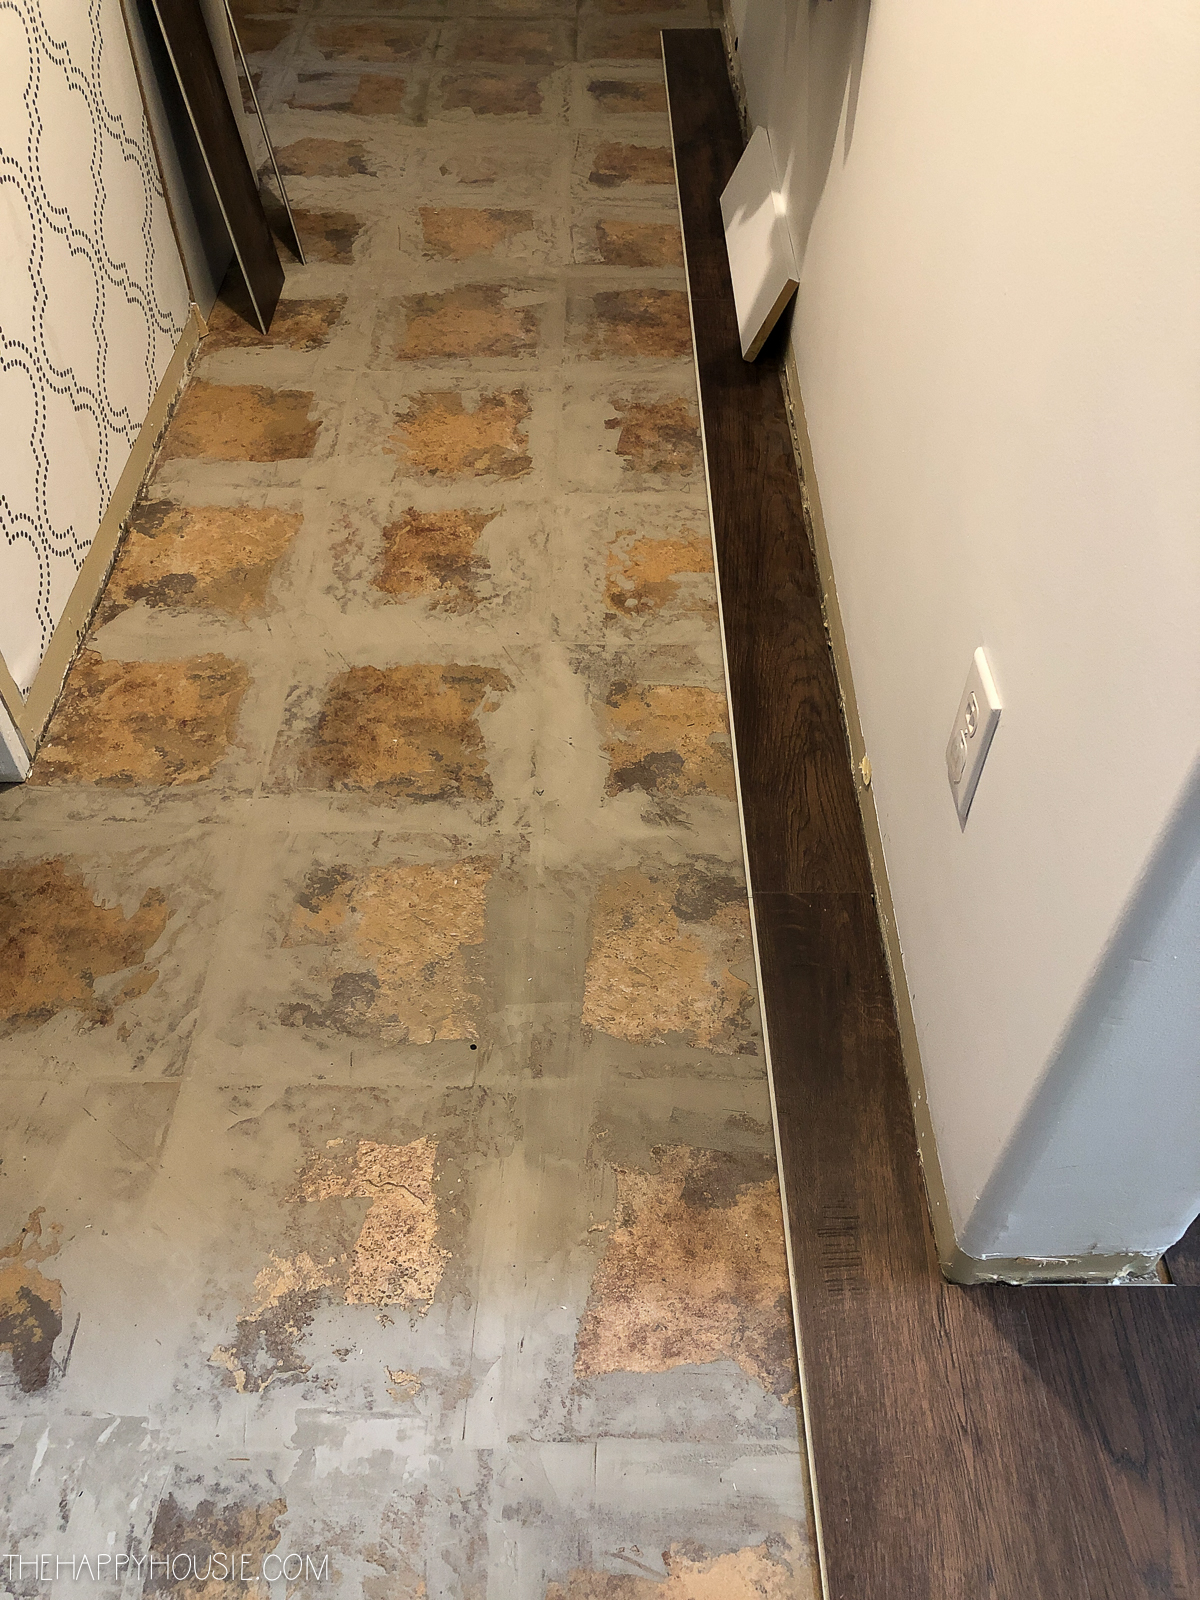 Install Vinyl Plank Over Tile Floors, How To Replace Ceramic Tile With Vinyl Flooring